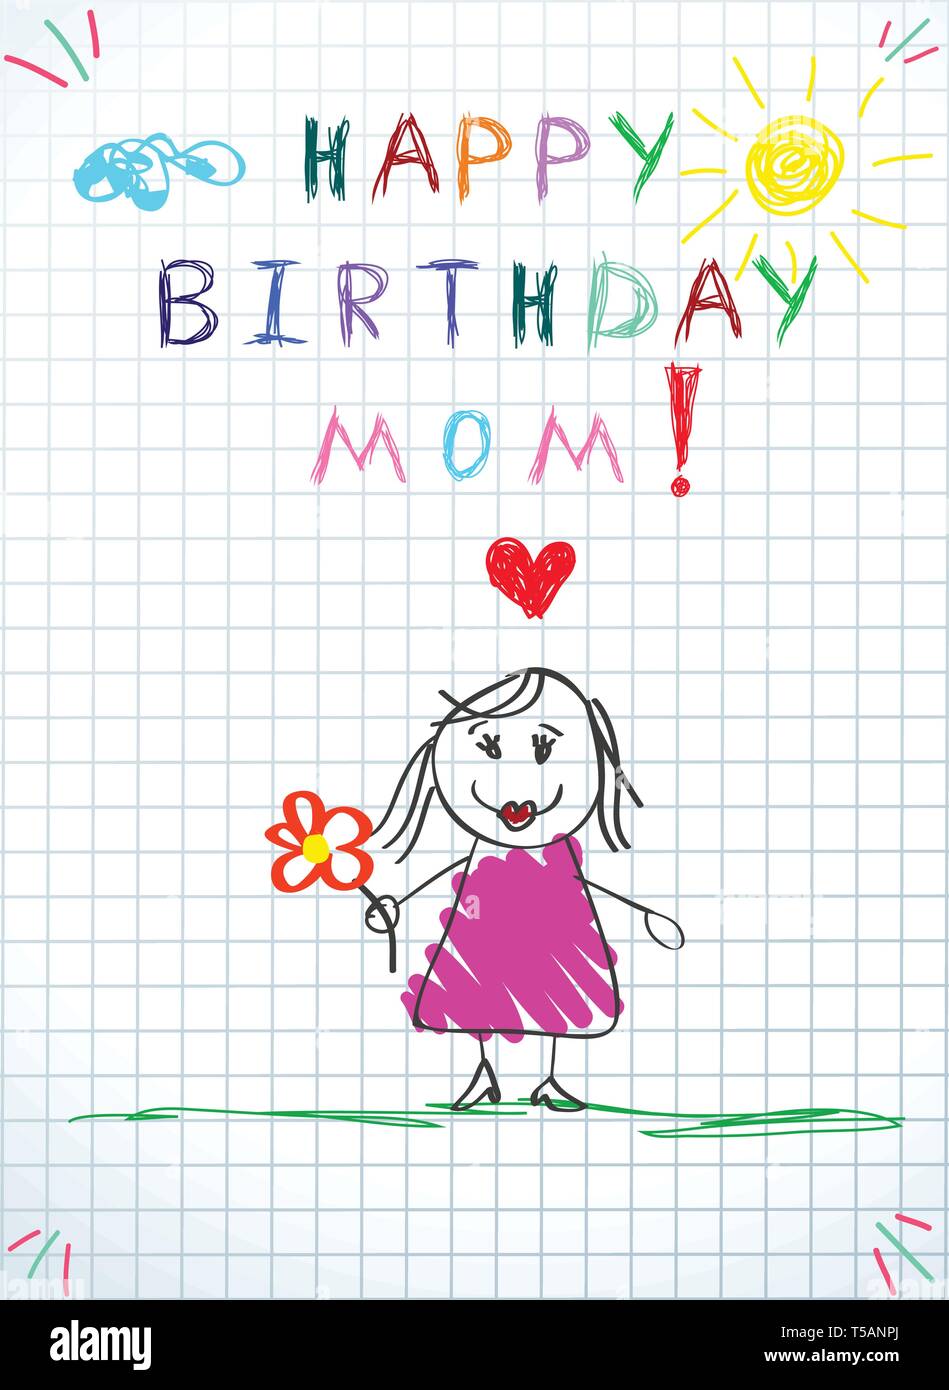 Happy Birthday Mom Greeting Card Baby Drawing Illustration With